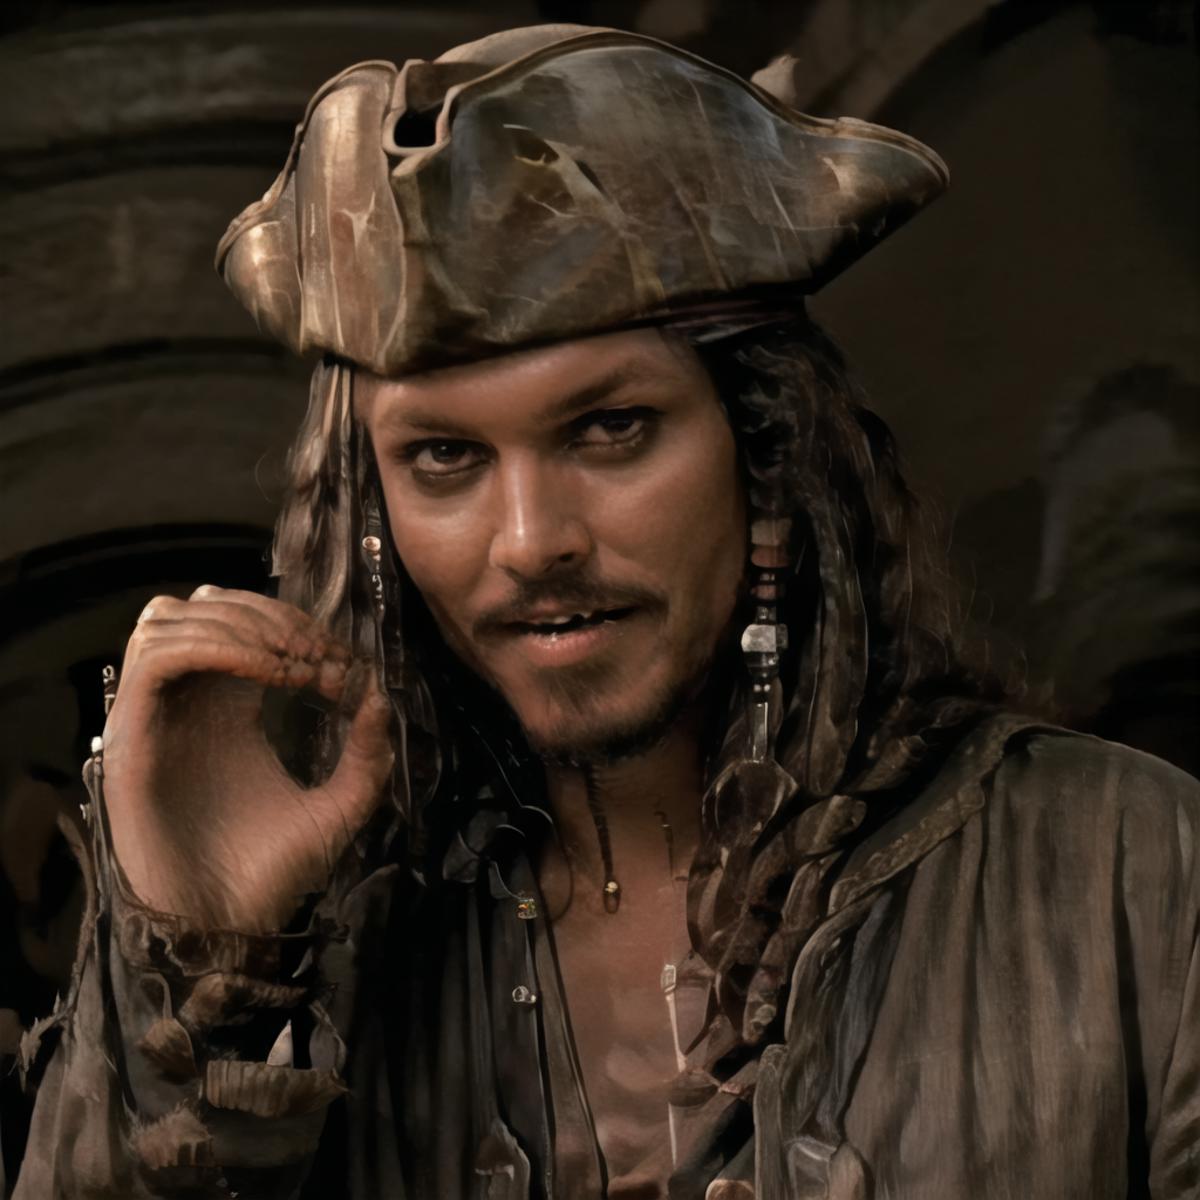 Jack Sparrow - Realistic + Anime - LoRA + Guide image by FallenIncursio